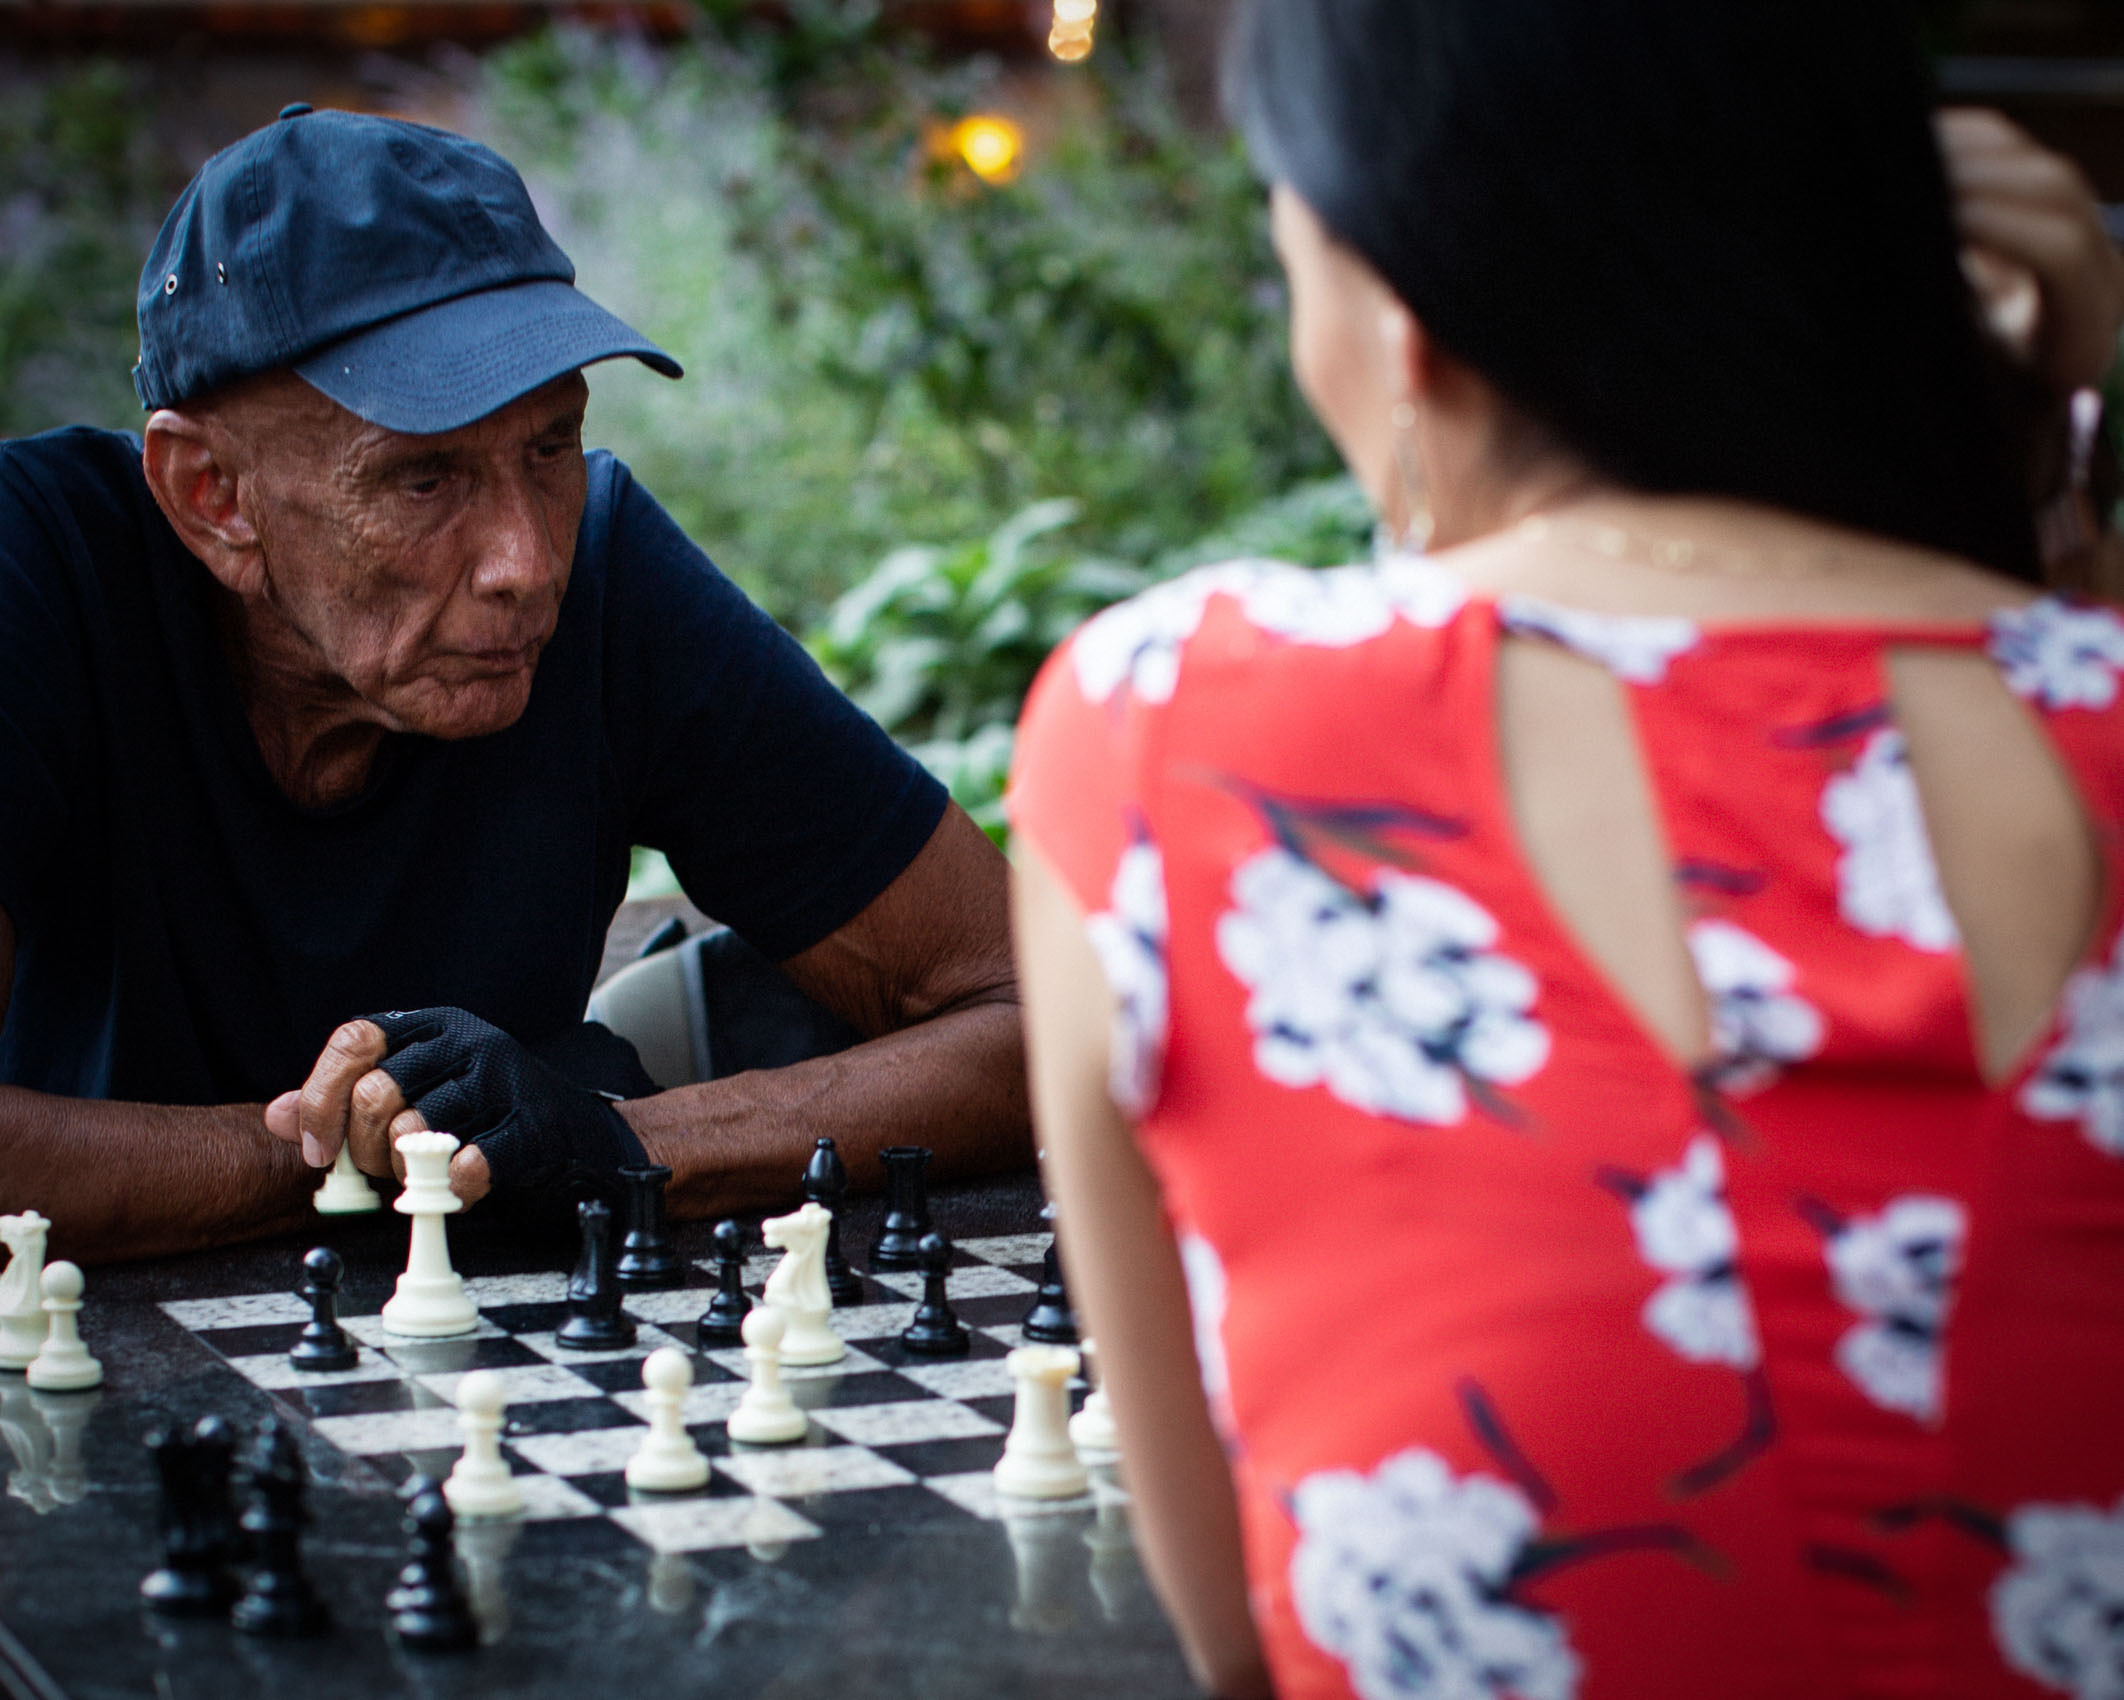 Chess players at Washington Square park by Claudine Williams